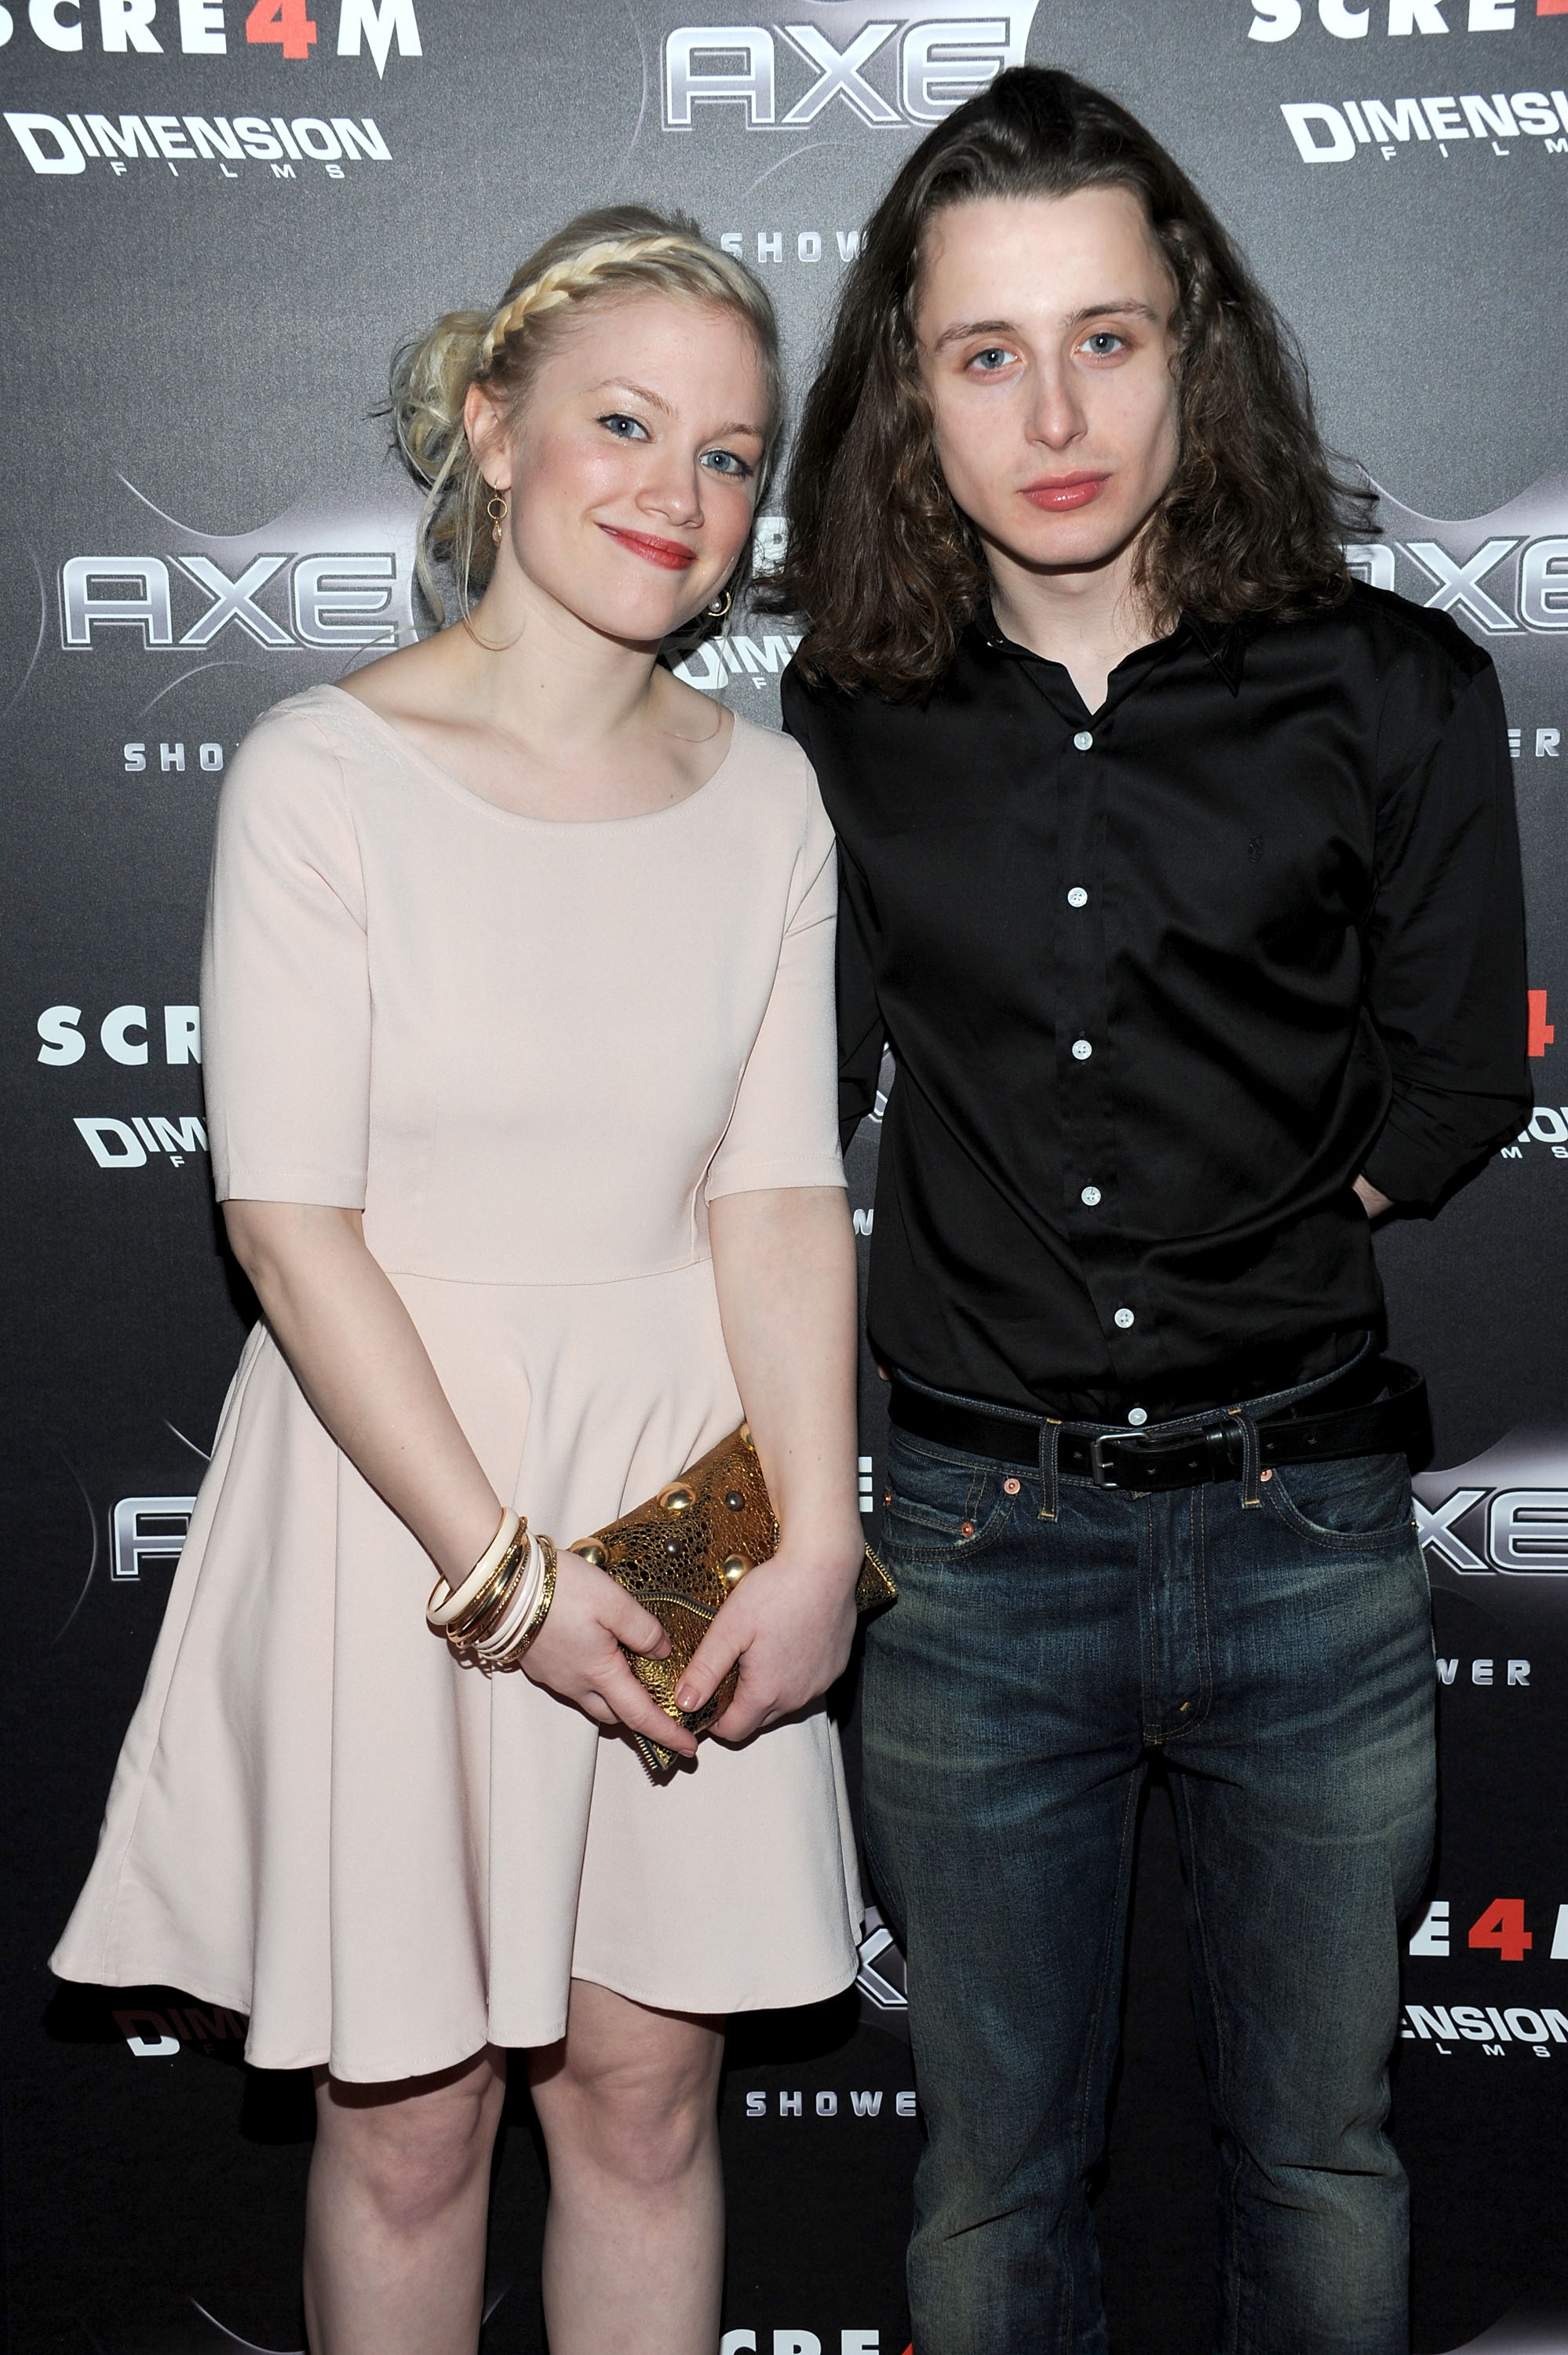 Rory Culkin and Sarah Scrivener pose at the World Premiere of The Weinstein Company's "Scream 4" presented by AXE Shower and held at the Grauman's Chinese Theatre on April 11, 2011, in Hollywood, California | Source: Getty Images